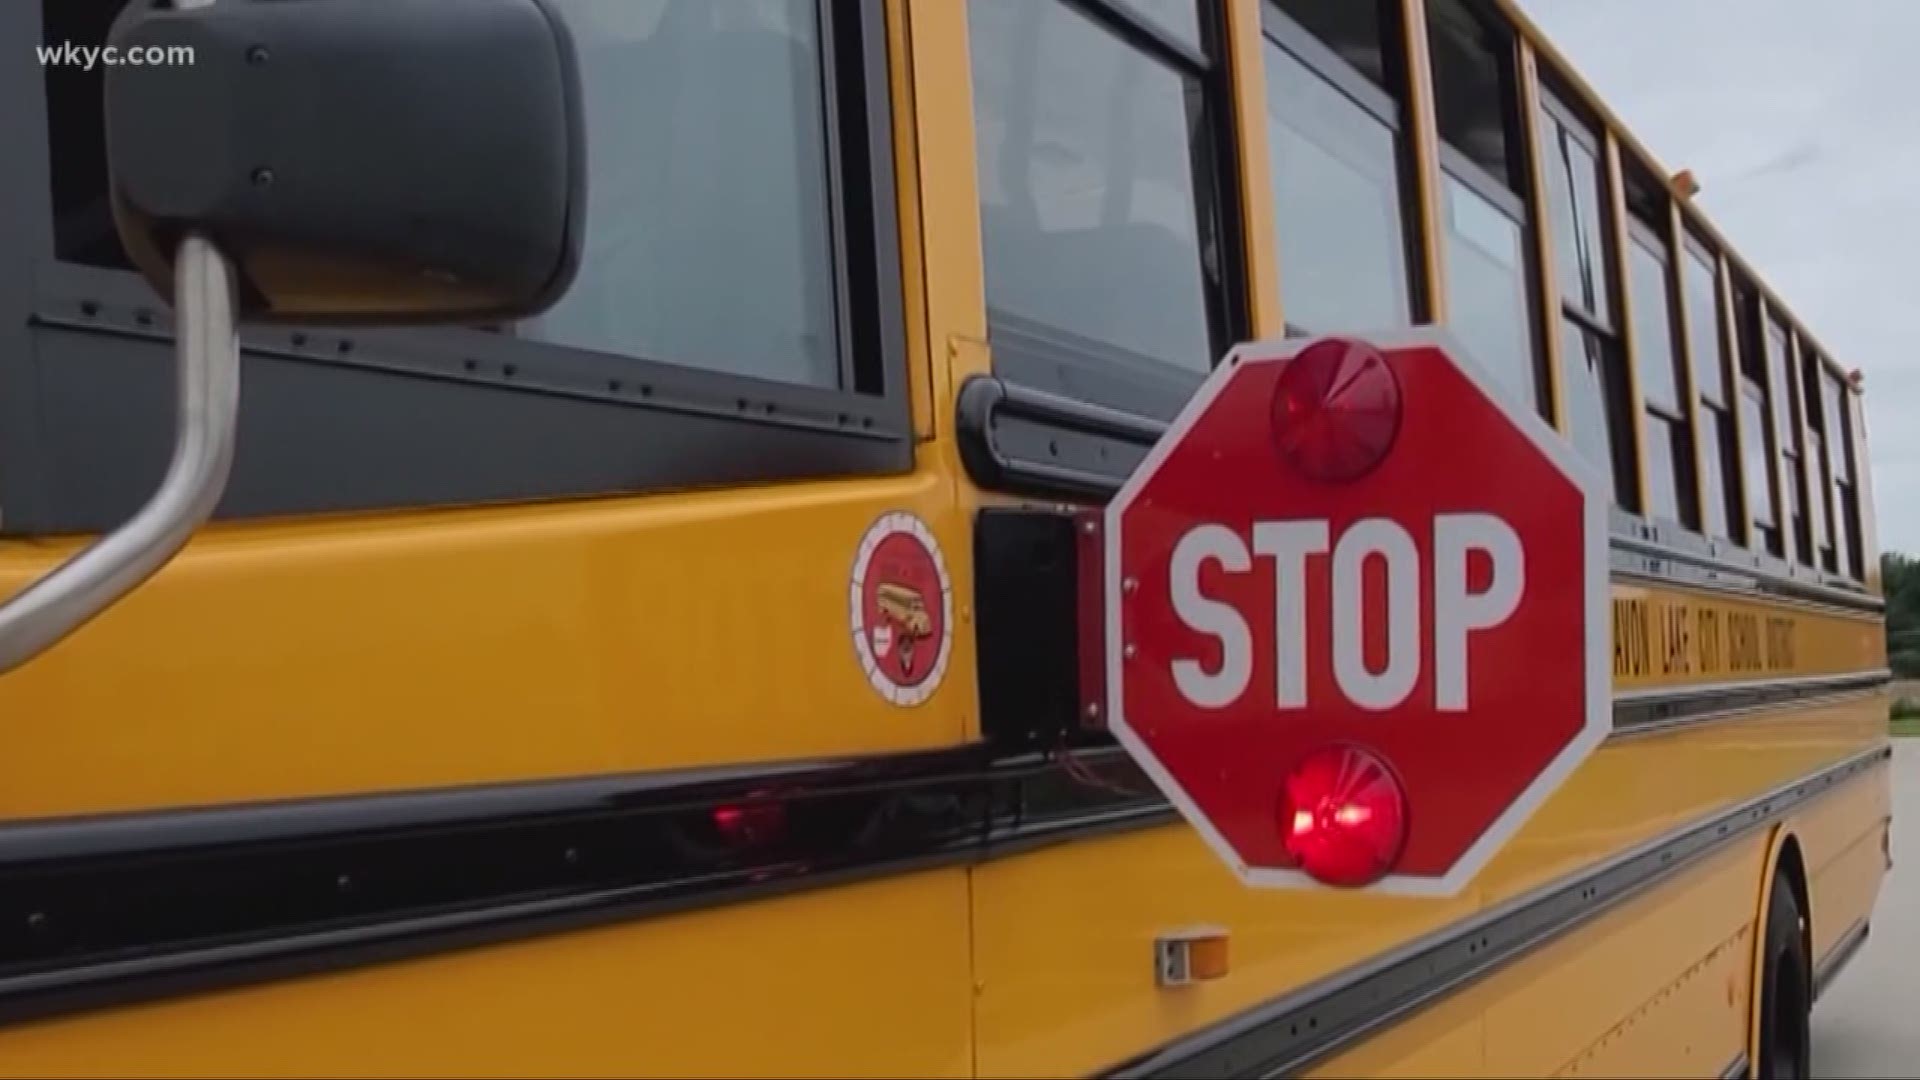 Avon Lake passes ordinance to increase penalties for those that pass school buses